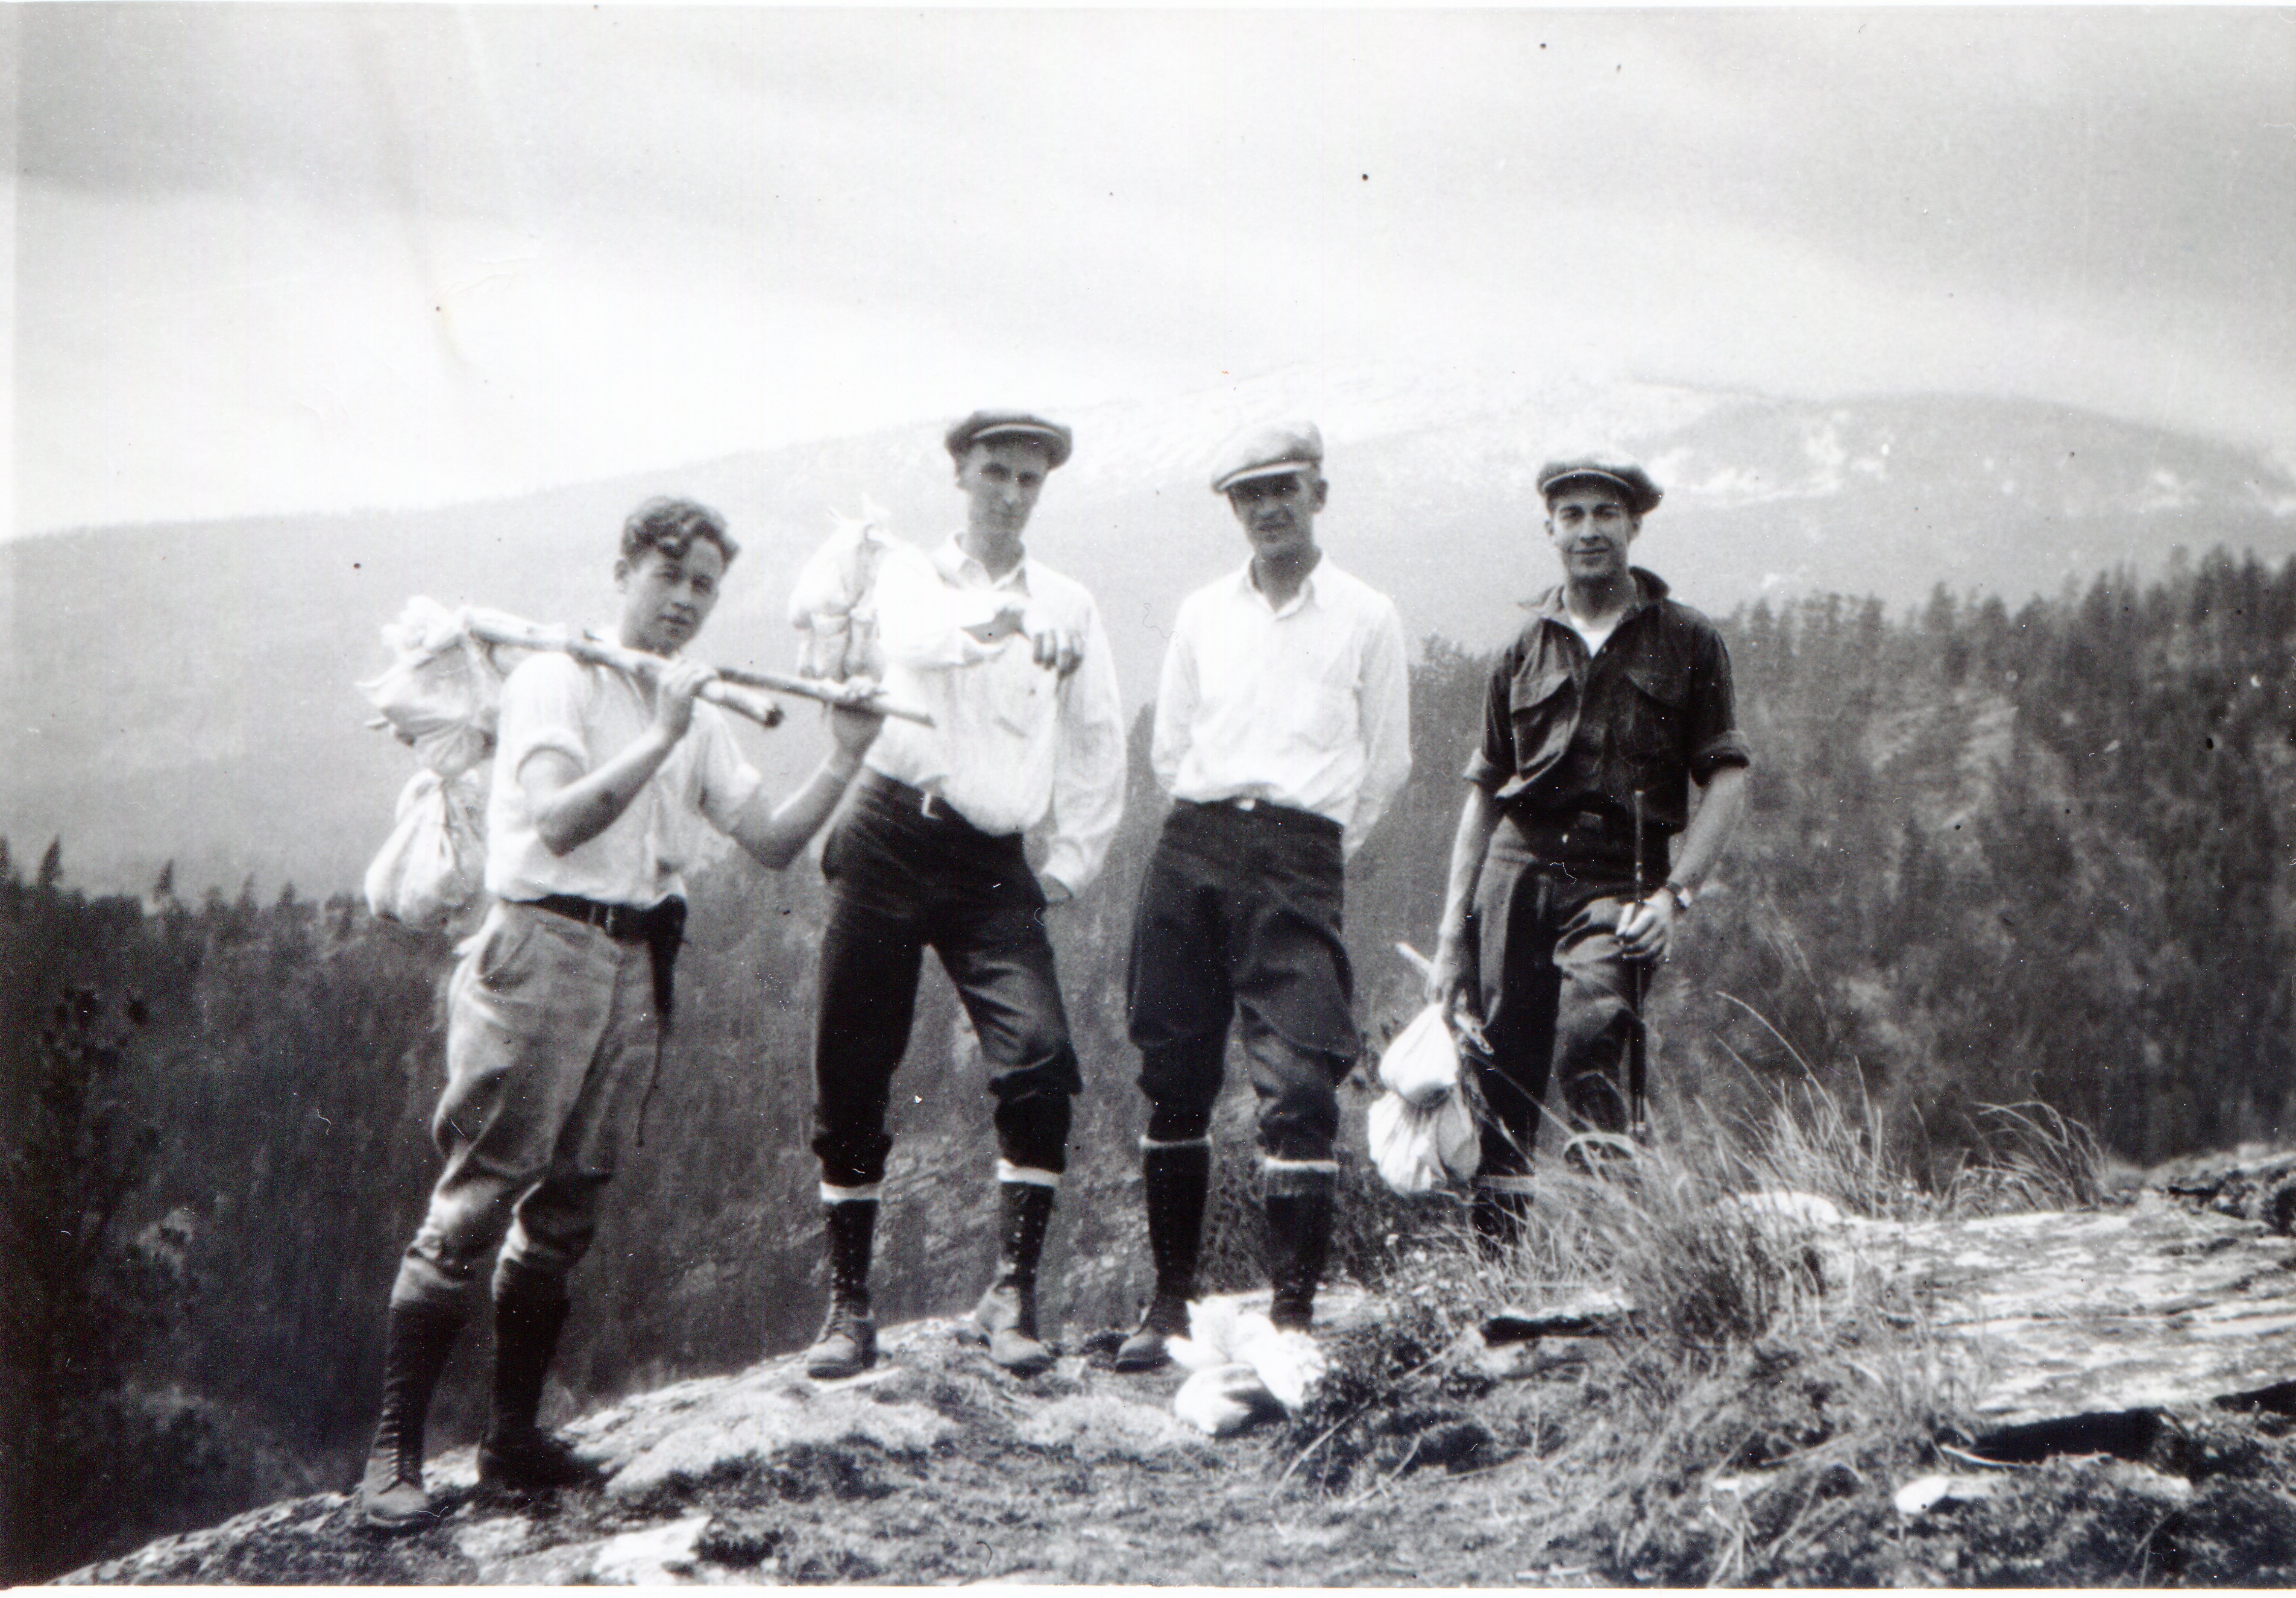 Men pose on top of a mountain ridge, wearing work clothes and carrying tick collecting equipment